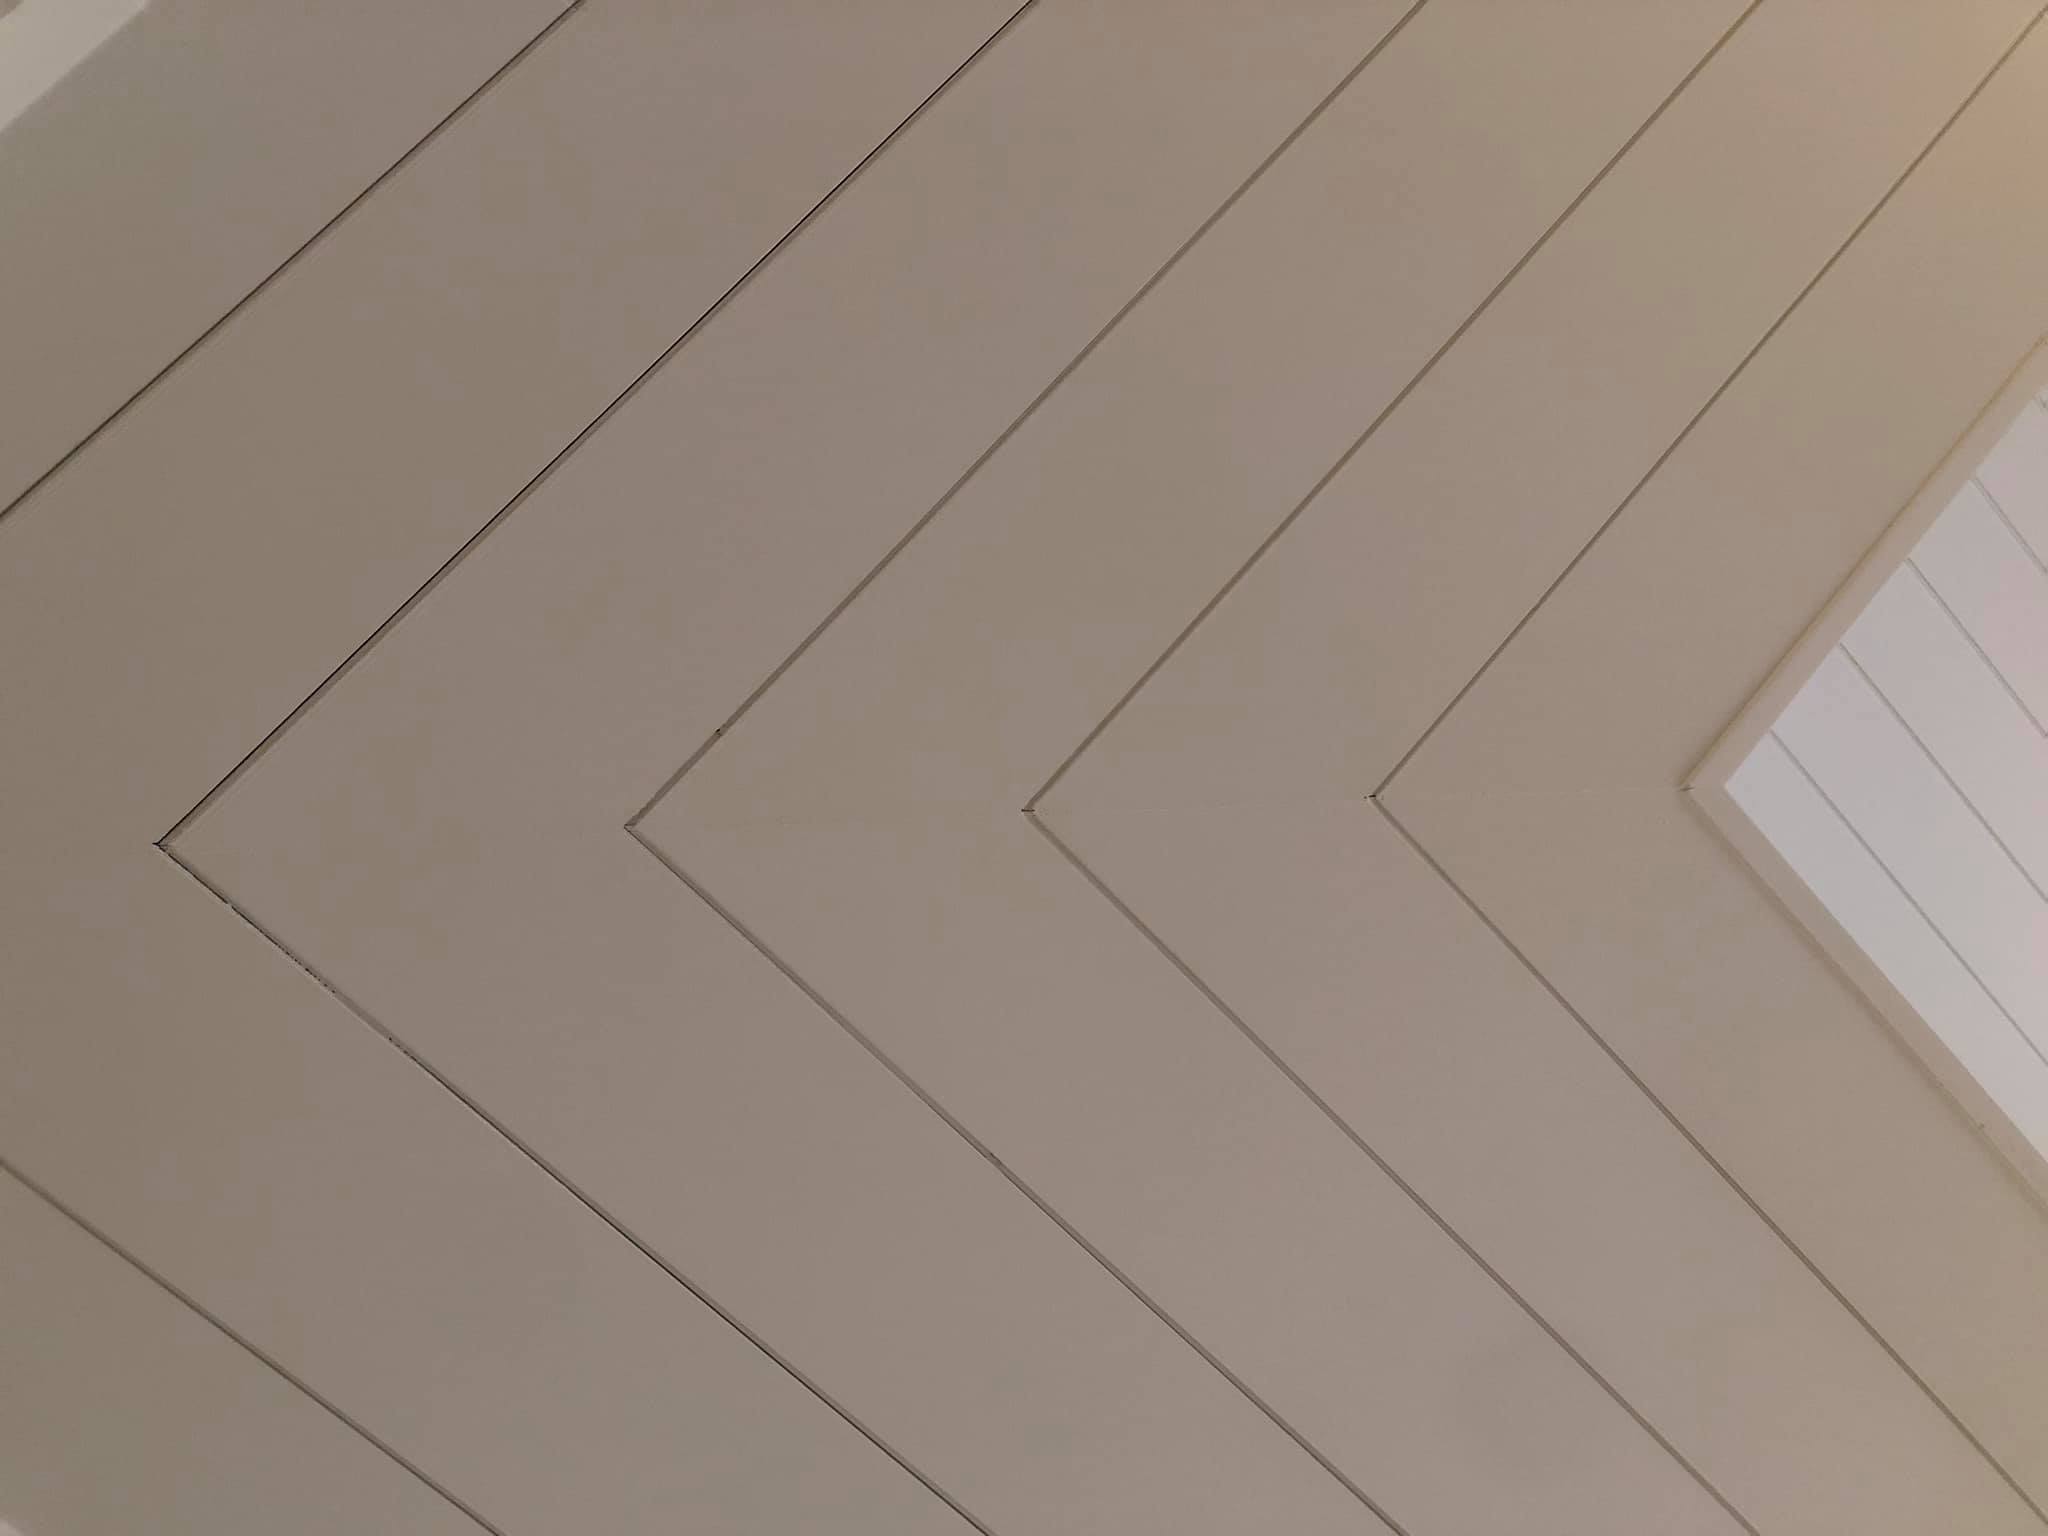 Tongue and Groove with Shiplap on Walls and Ceiling Closeup